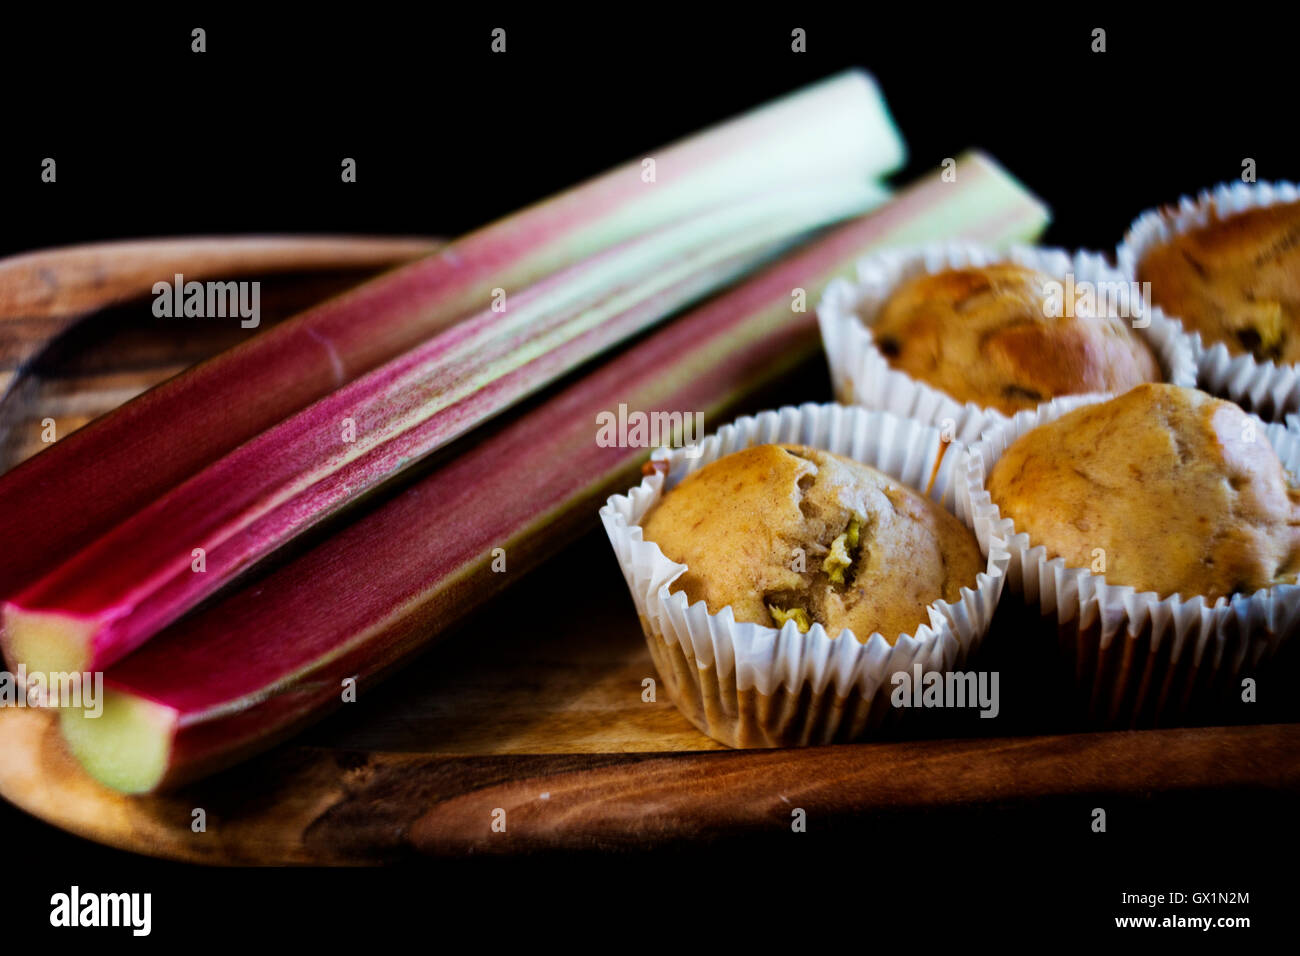 Delicious  chocolate rhubarb muffin Stock Photo